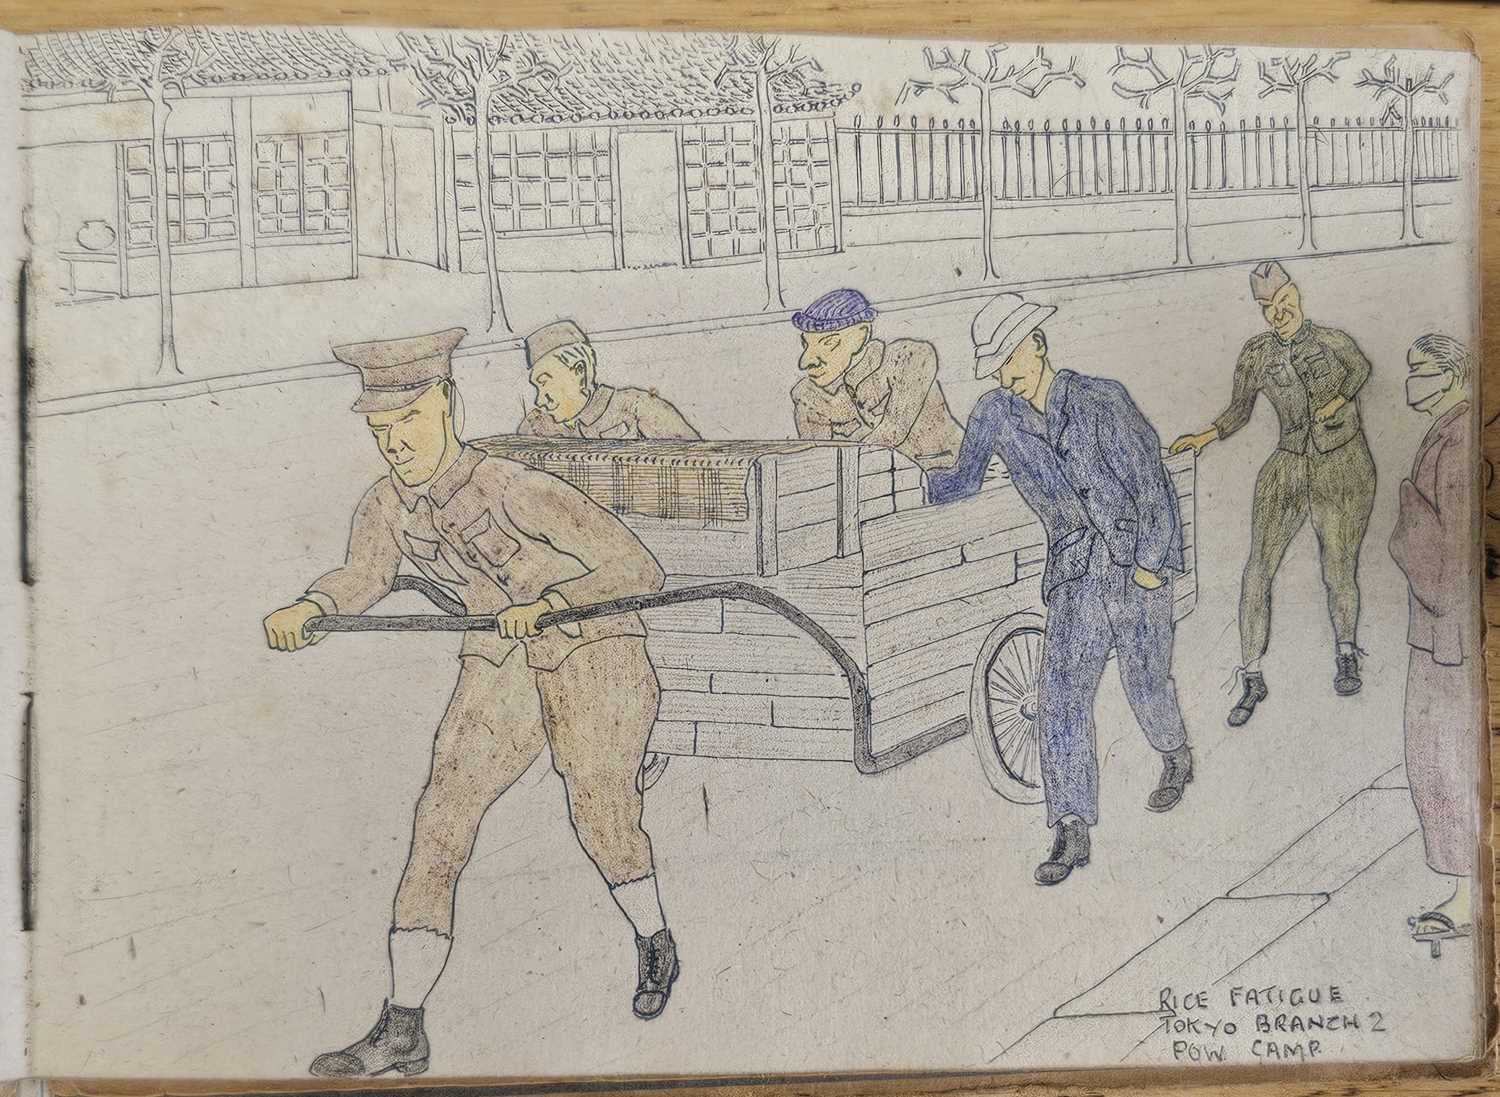 Rare Second World War sketchbook by POW 2nd/Lt Arkless Lockey - Image 35 of 35